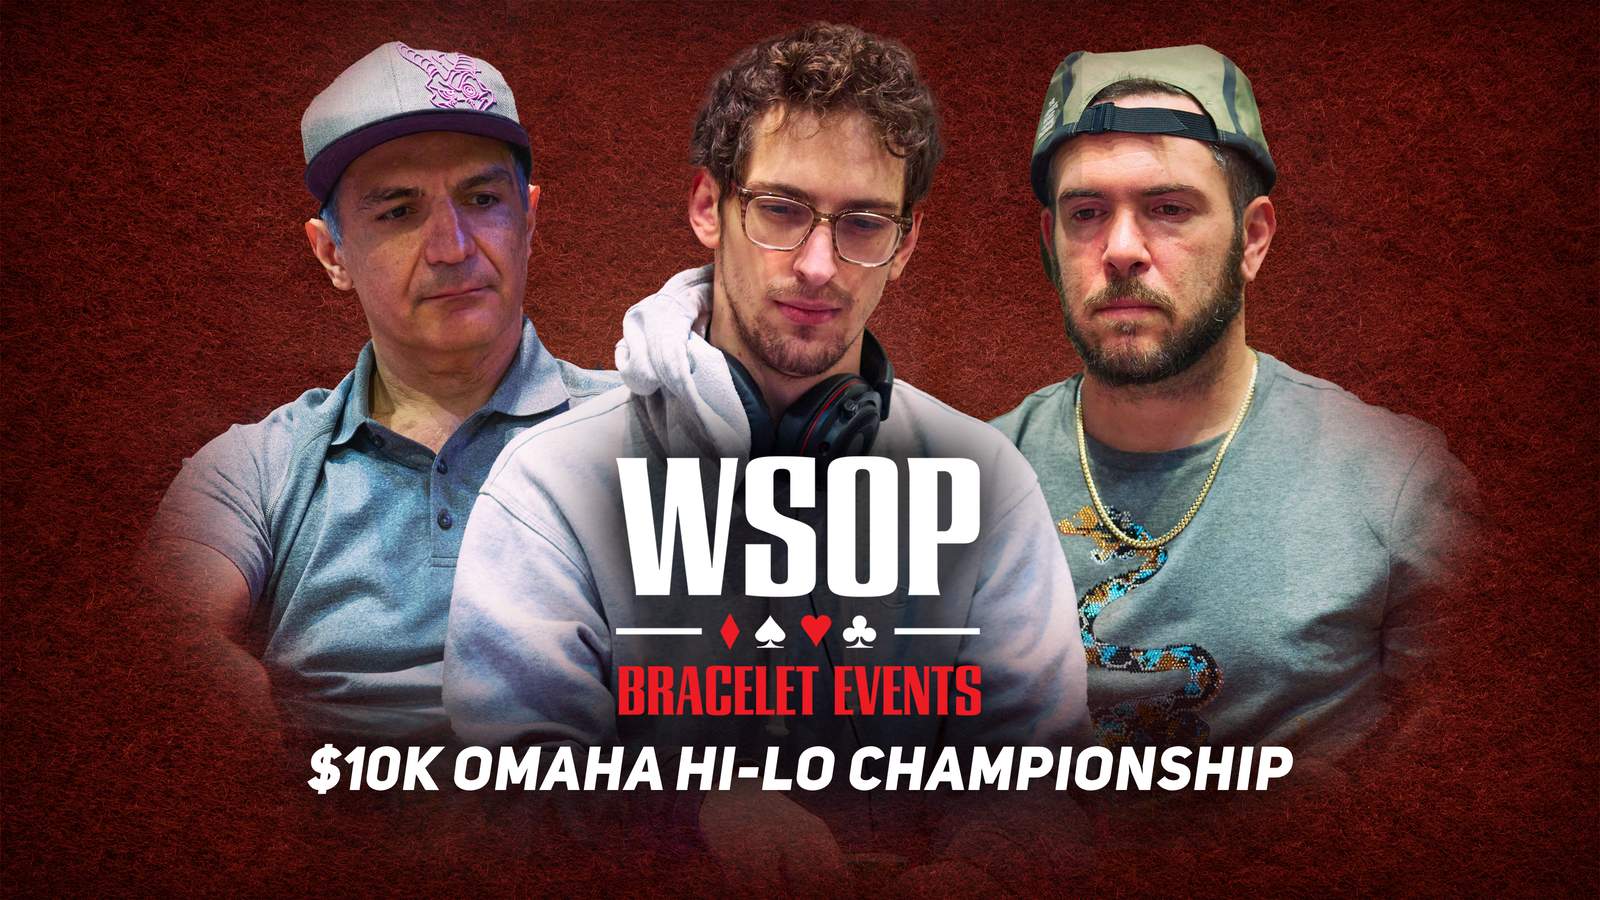 Watch the WSOP Event #15: $10K Omaha Hi-Lo Championship Final Table on PokerGO.com at 8 p.m. ET